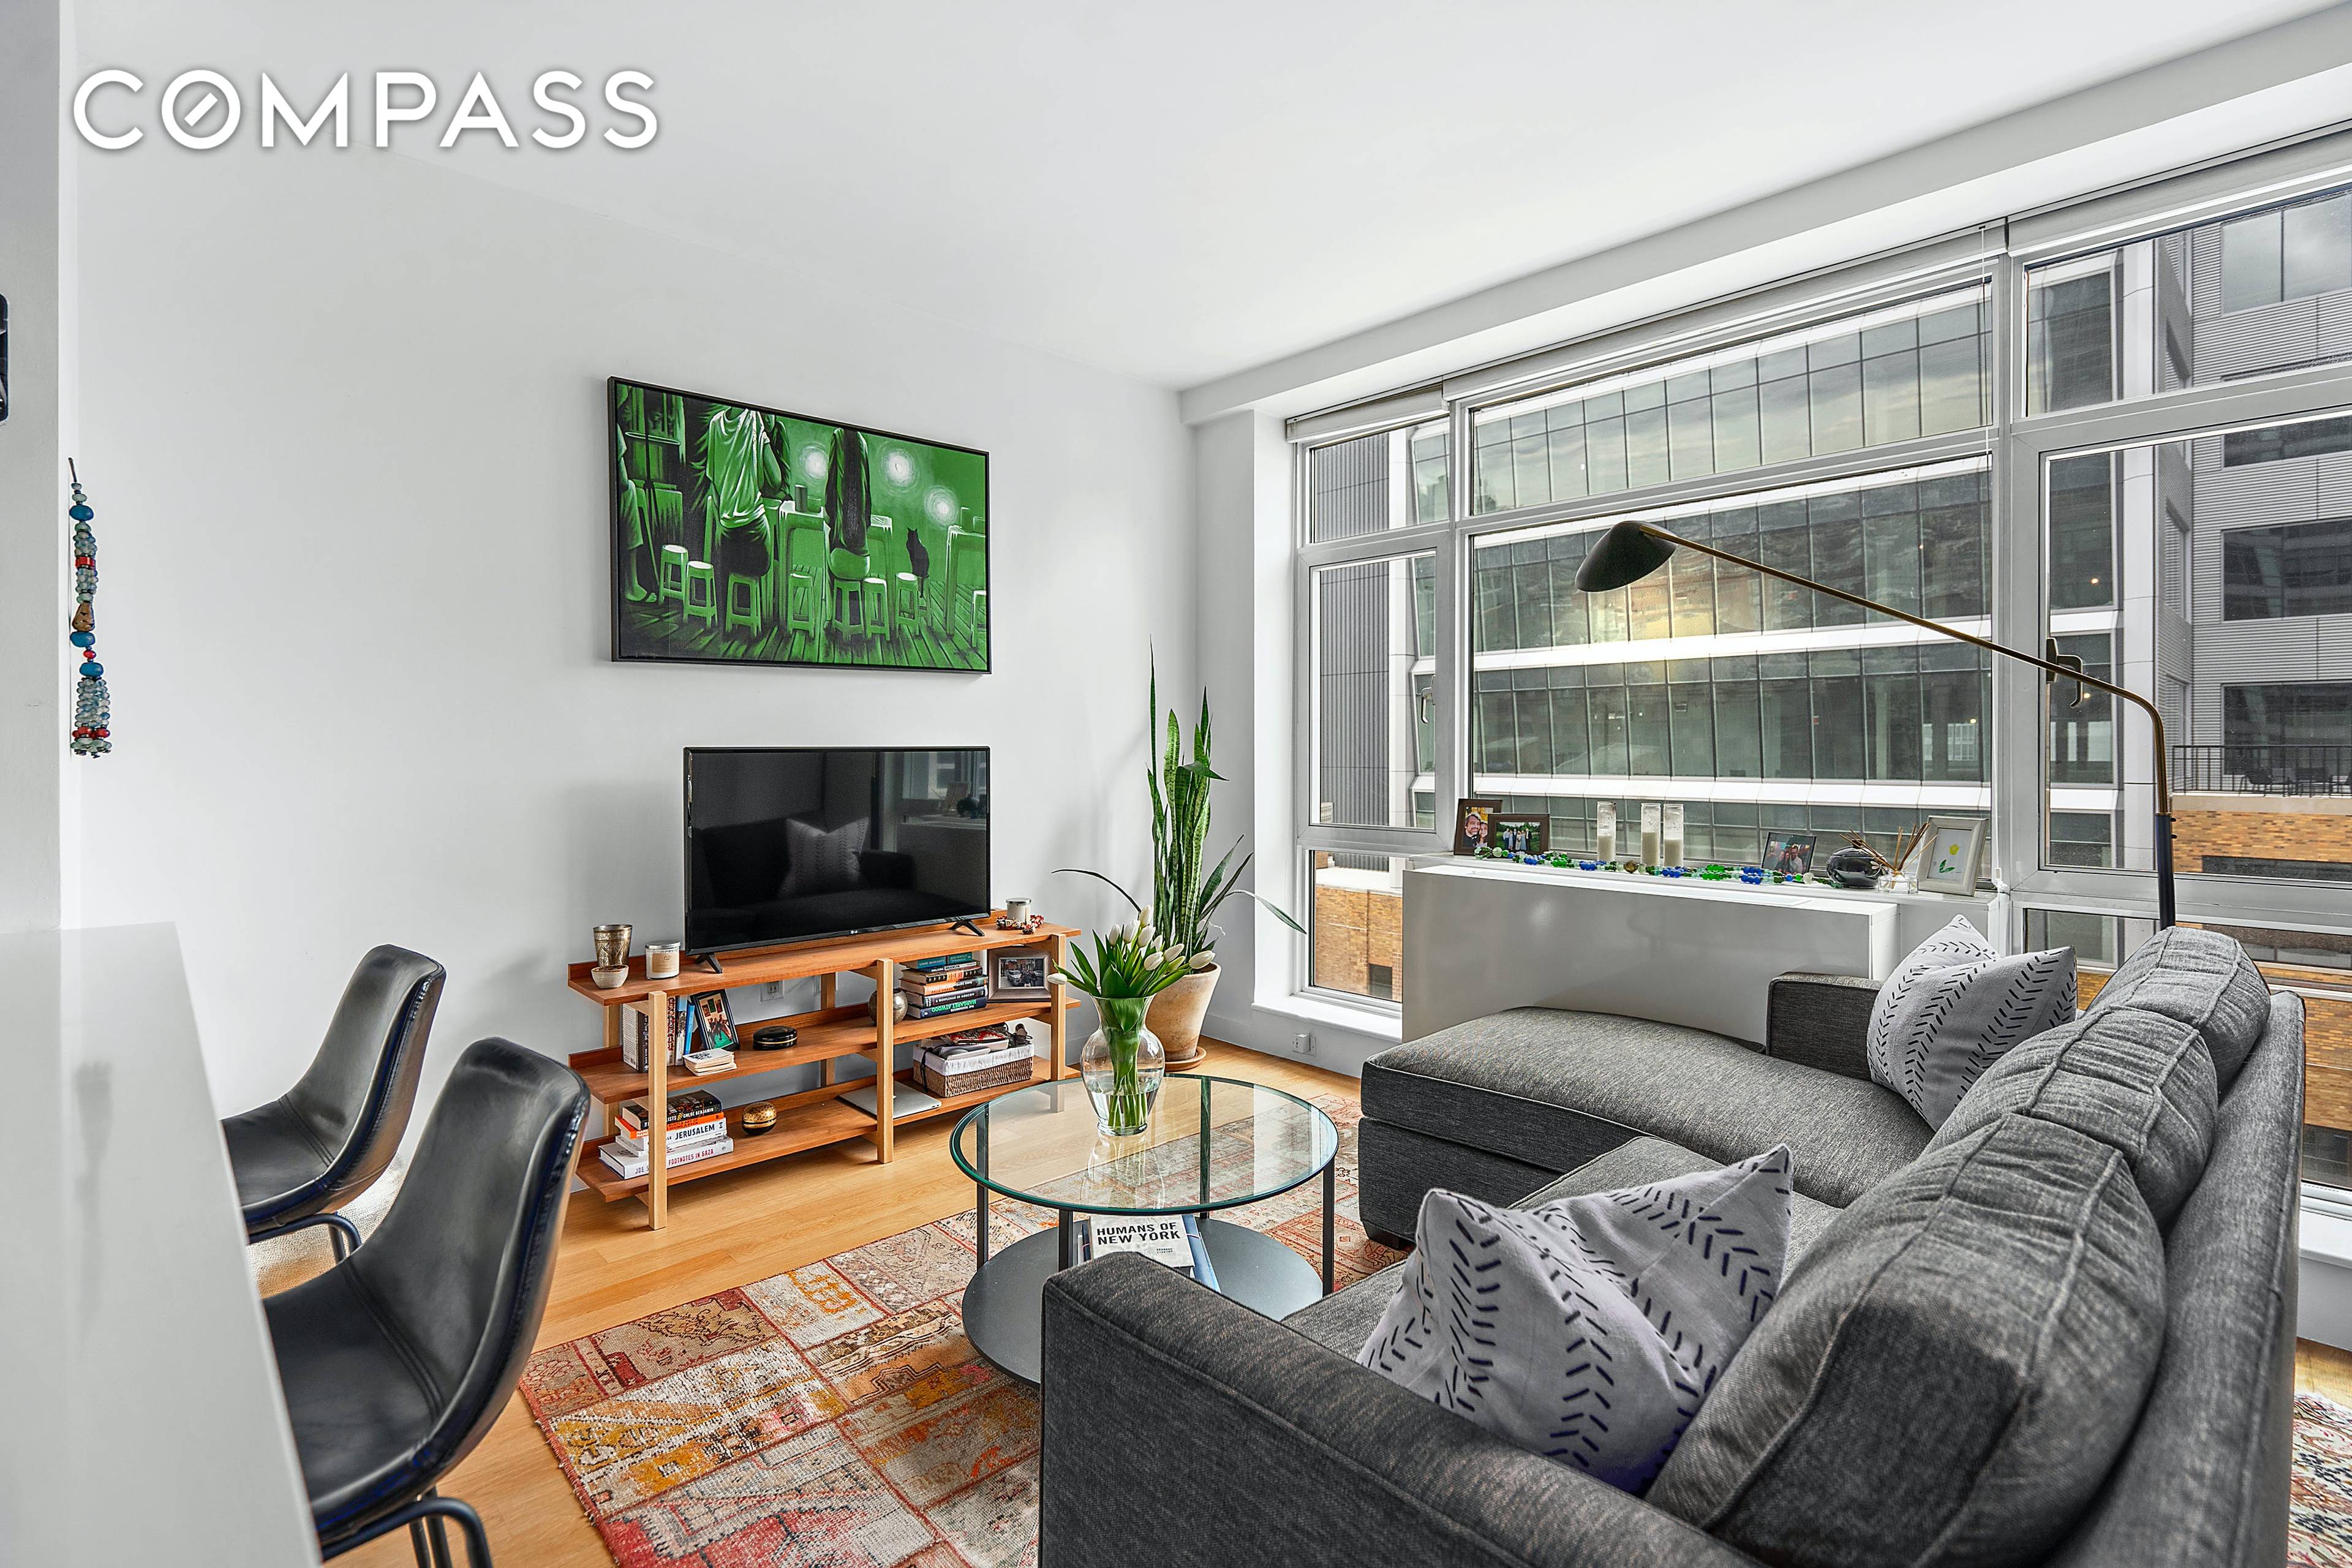 Back on the market ! Apartment 16H is a beautiful one bedroom rental in one of Brooklyn s most coveted condominium addresses.